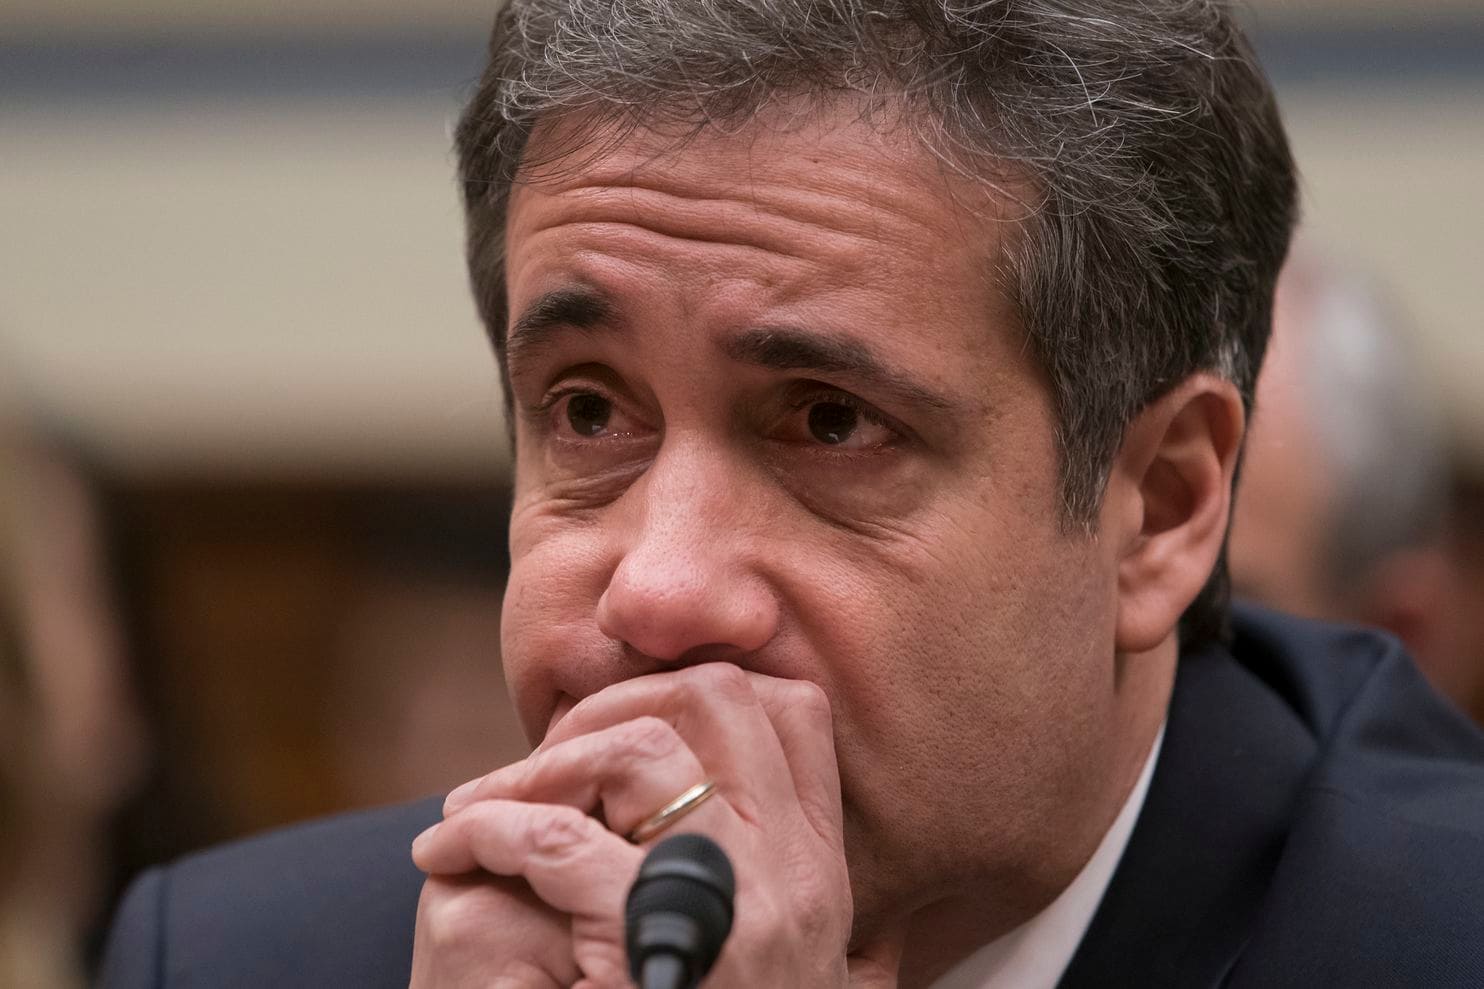 Trump ex-lawyer Michael Cohen's testimony gives Republicans and Democrats fodder in a possible impeachment fight